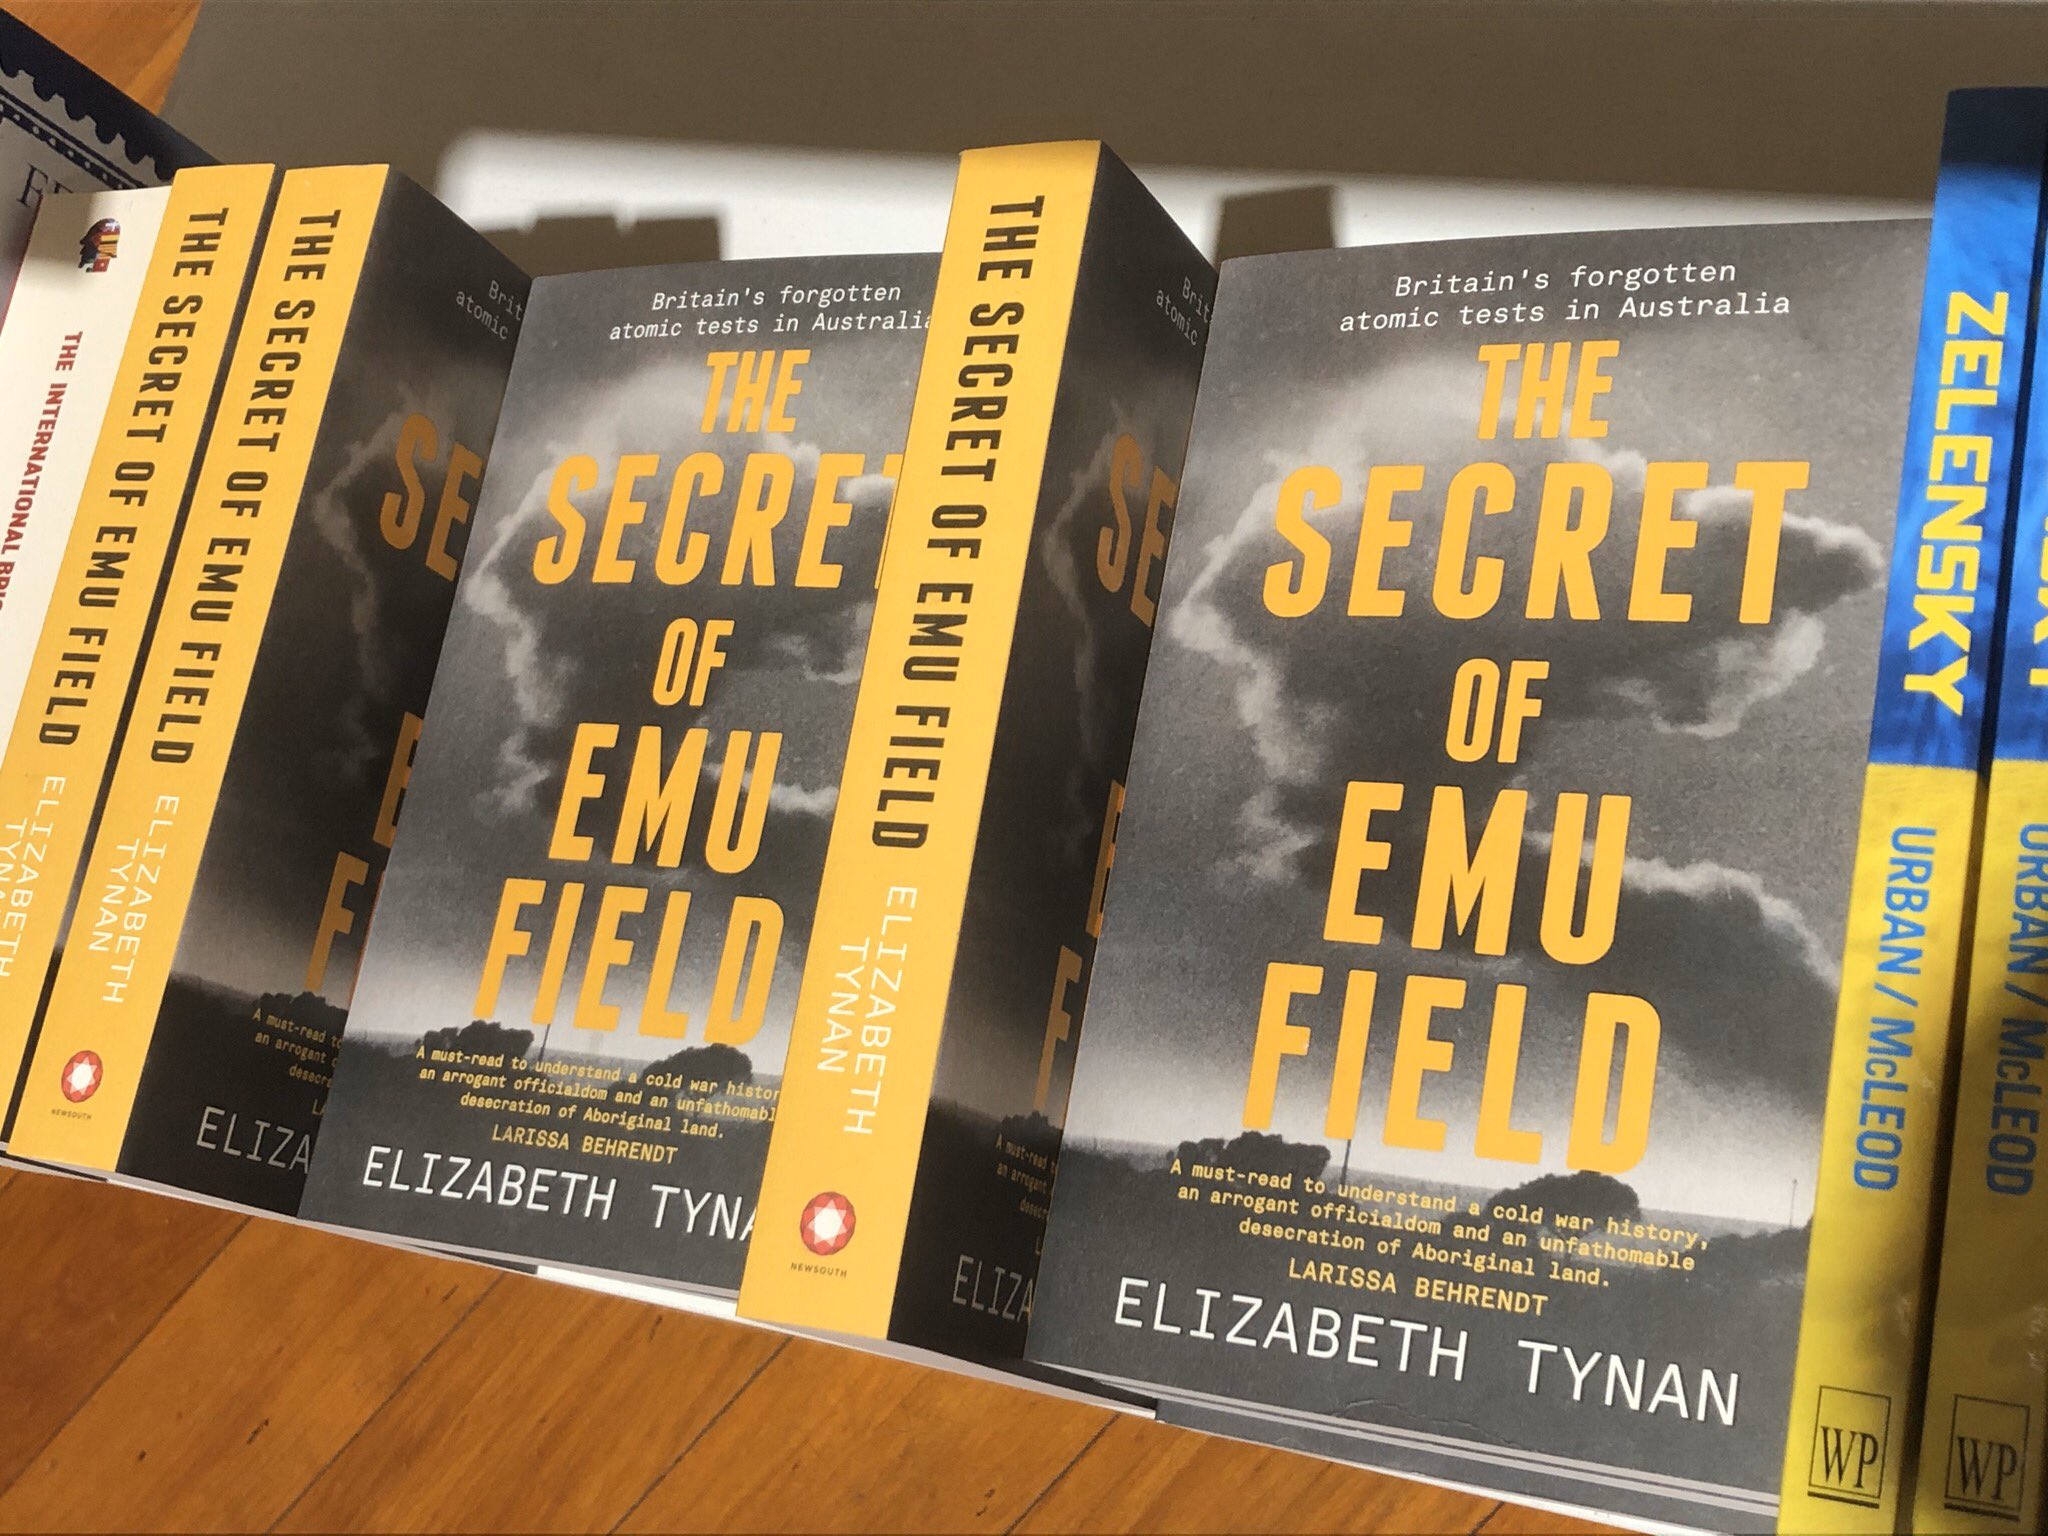 Mary Who Bookshop Great To See Your New Release The Secret Of Emu Field In Review Last Weekend Liztynantsv Atomictesting Emufield Maralinga T Co Tdcua9vjpe Twitter